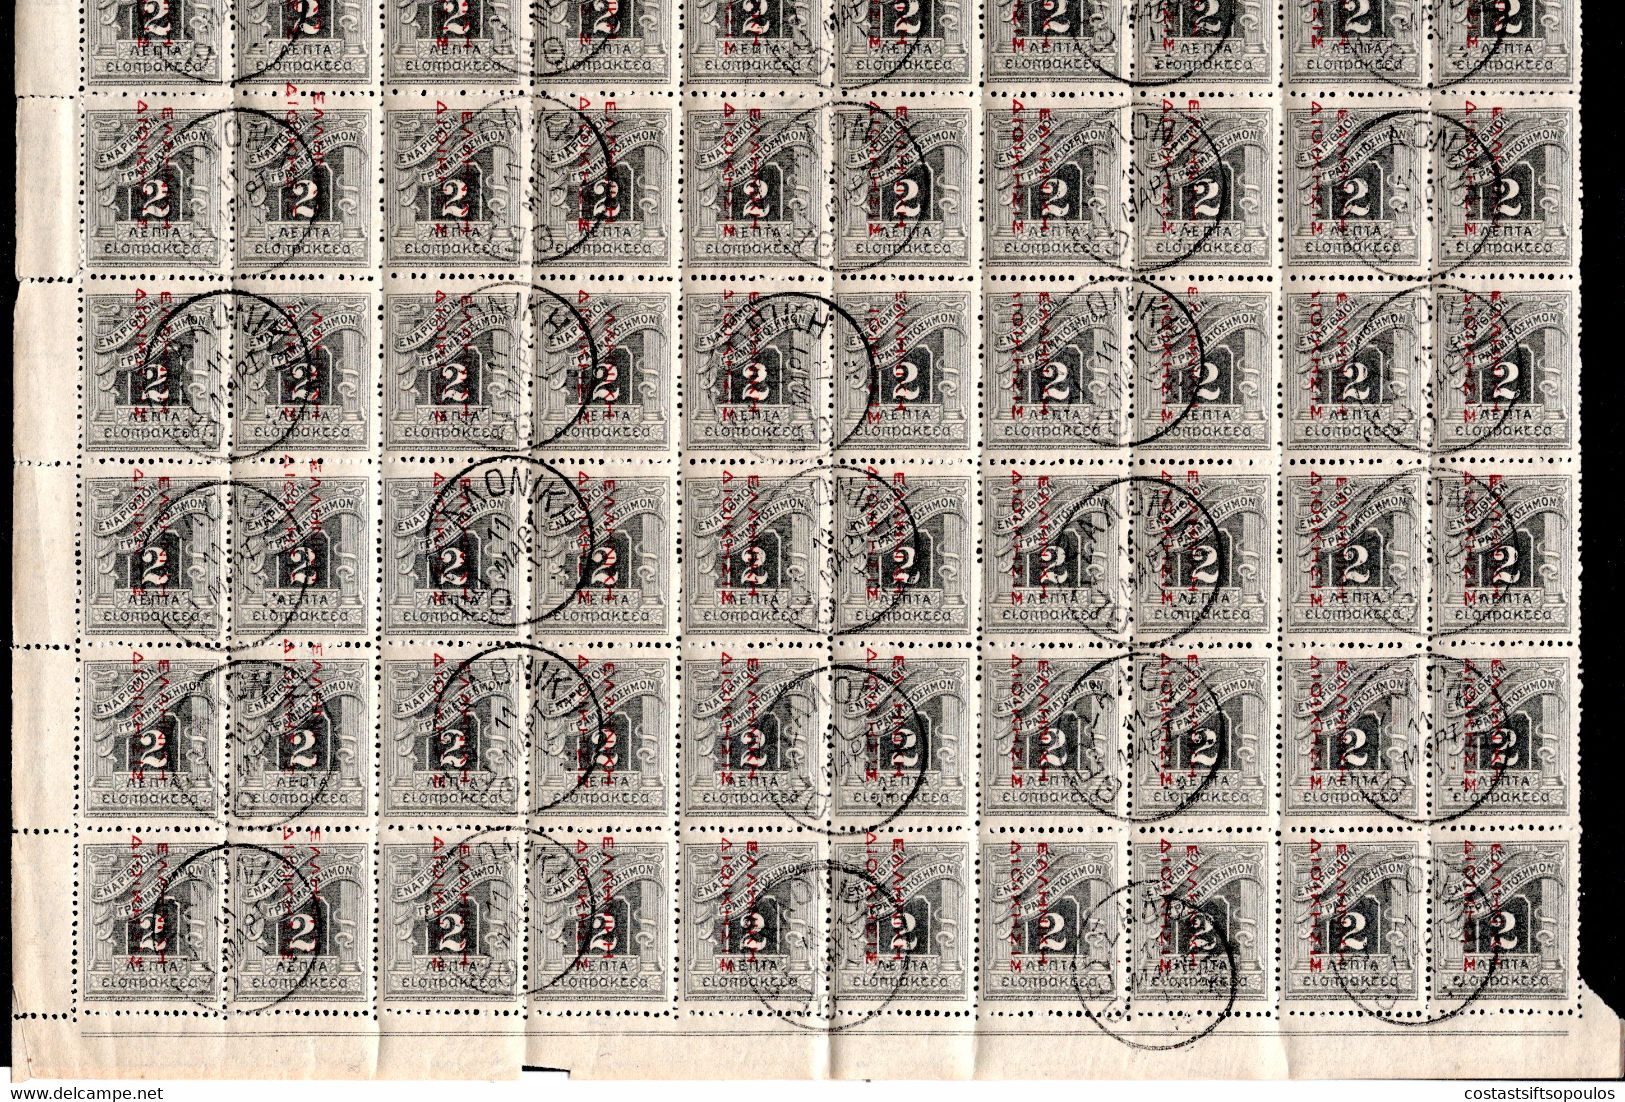 301.GREECE.1912 HELLAS D76 AND VARIETIES,HELLENIC ADM.2L.SHEET OF 100 C.T.O. SALONIQUE,CATALOGUE VALUE OVER EURO 1000 - Used Stamps